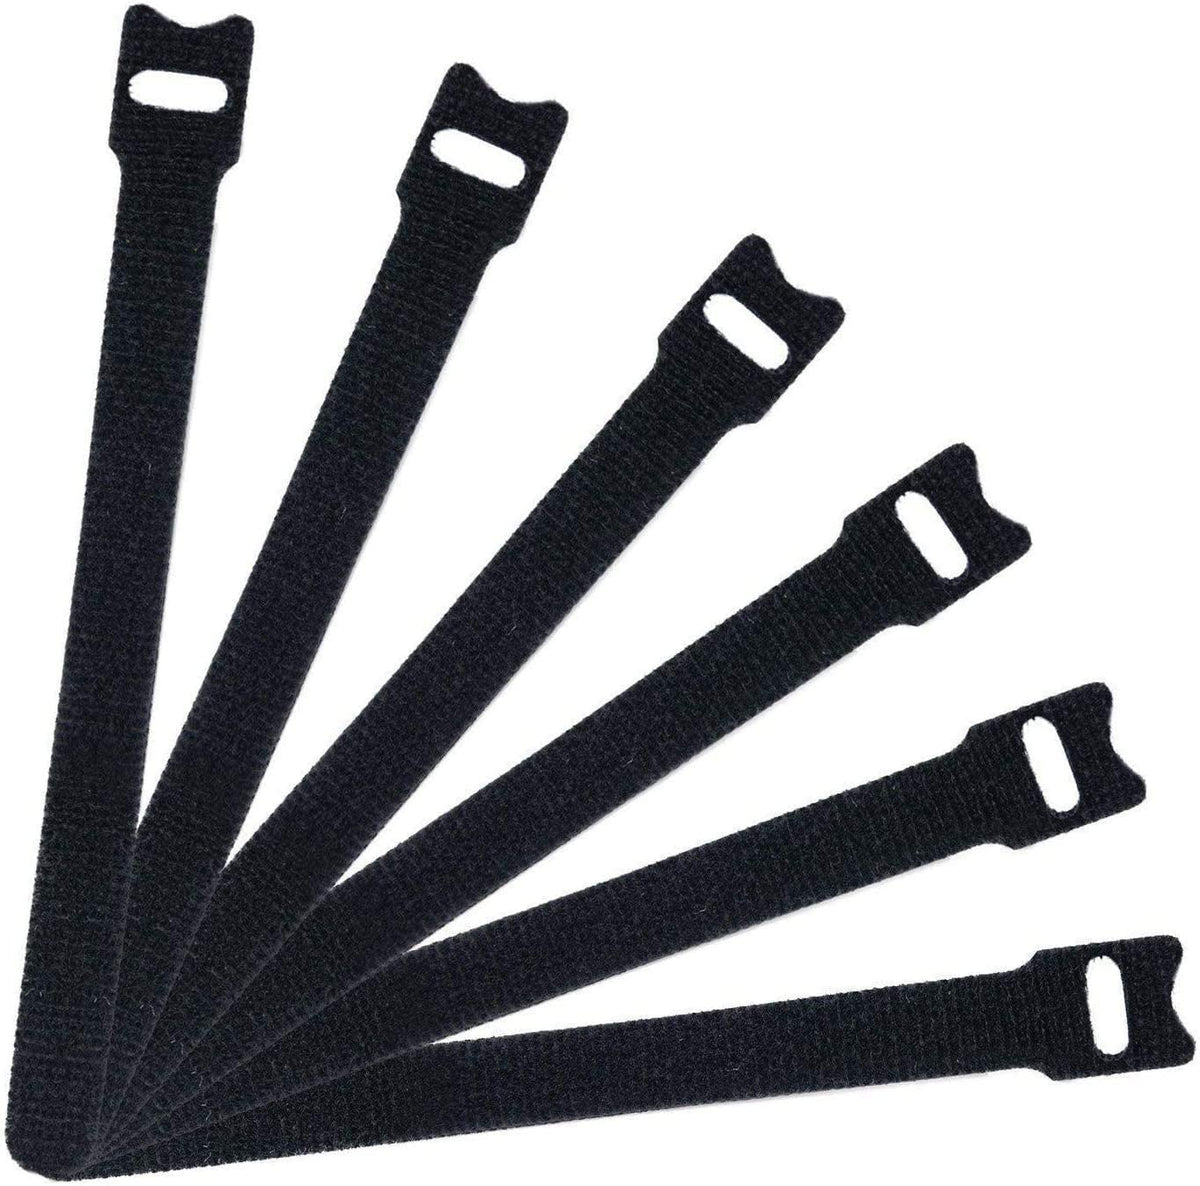 50 PCS Reusable Fastening Cable Ties, Microfiber Cloth Hook and